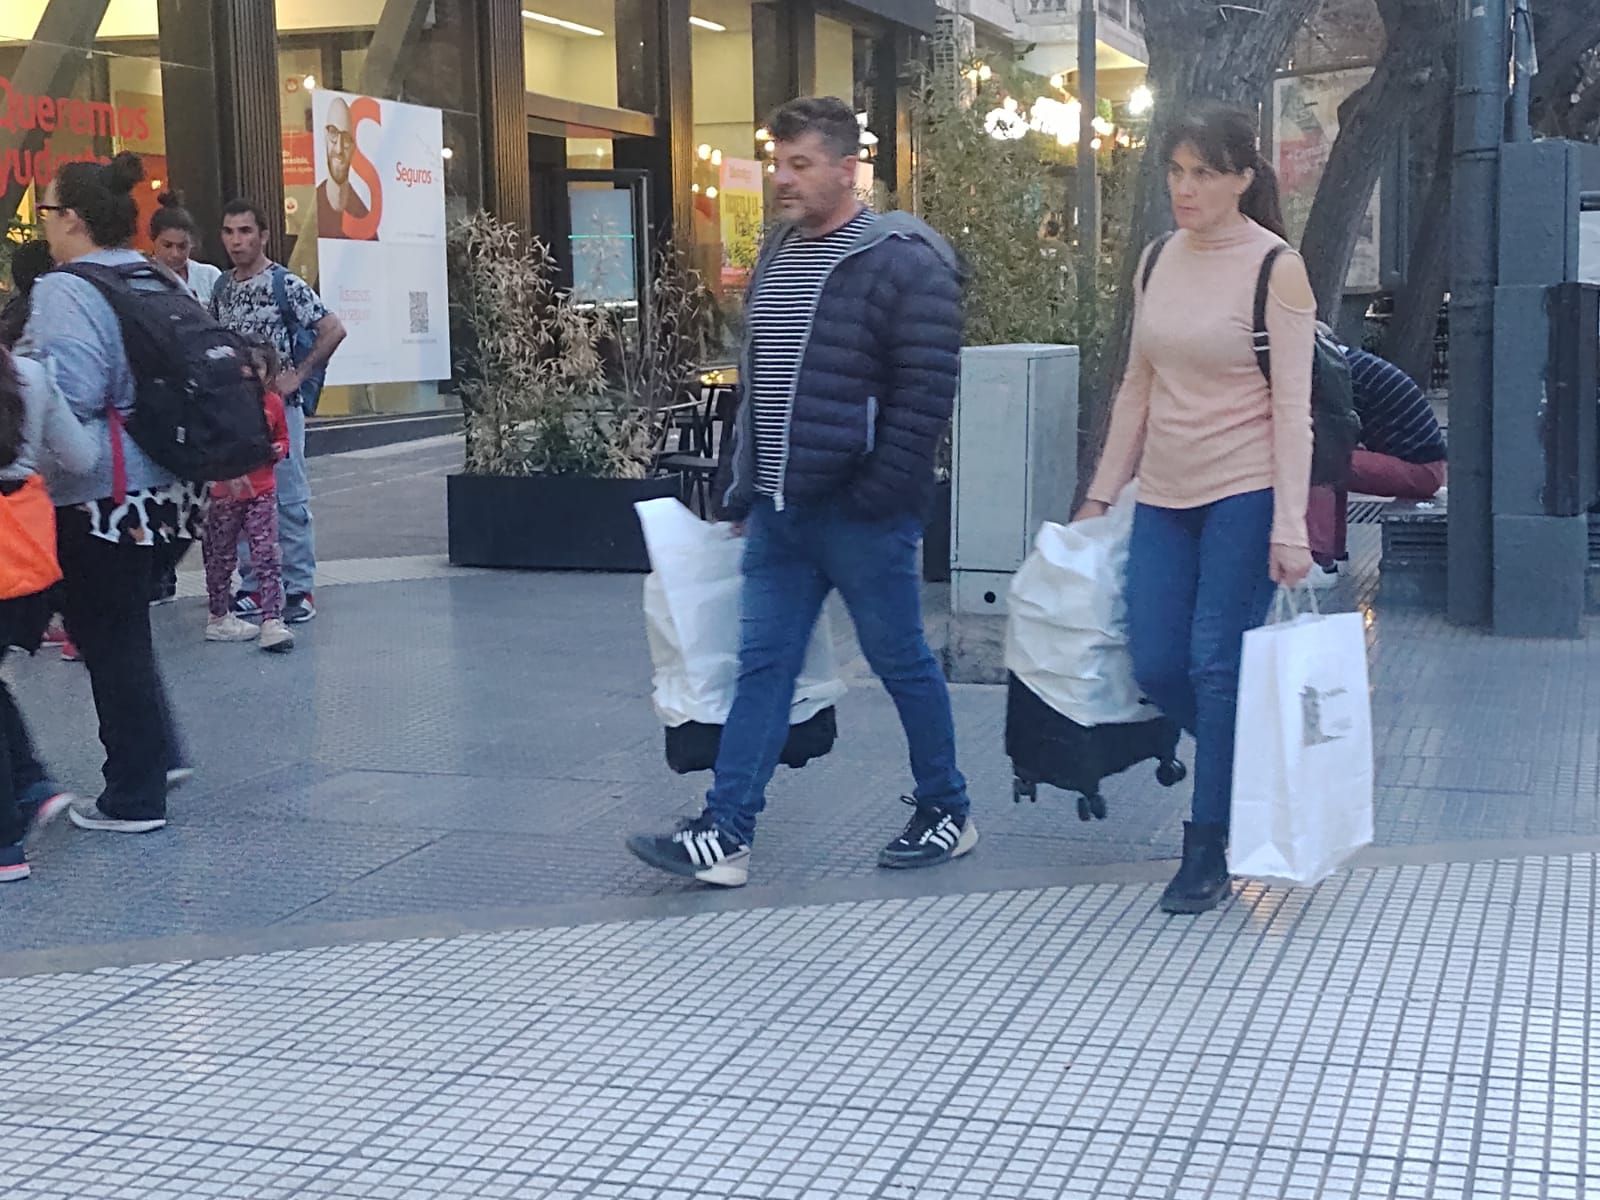 The center of Mendoza was full of Chilean visitors between Monday and Tuesday